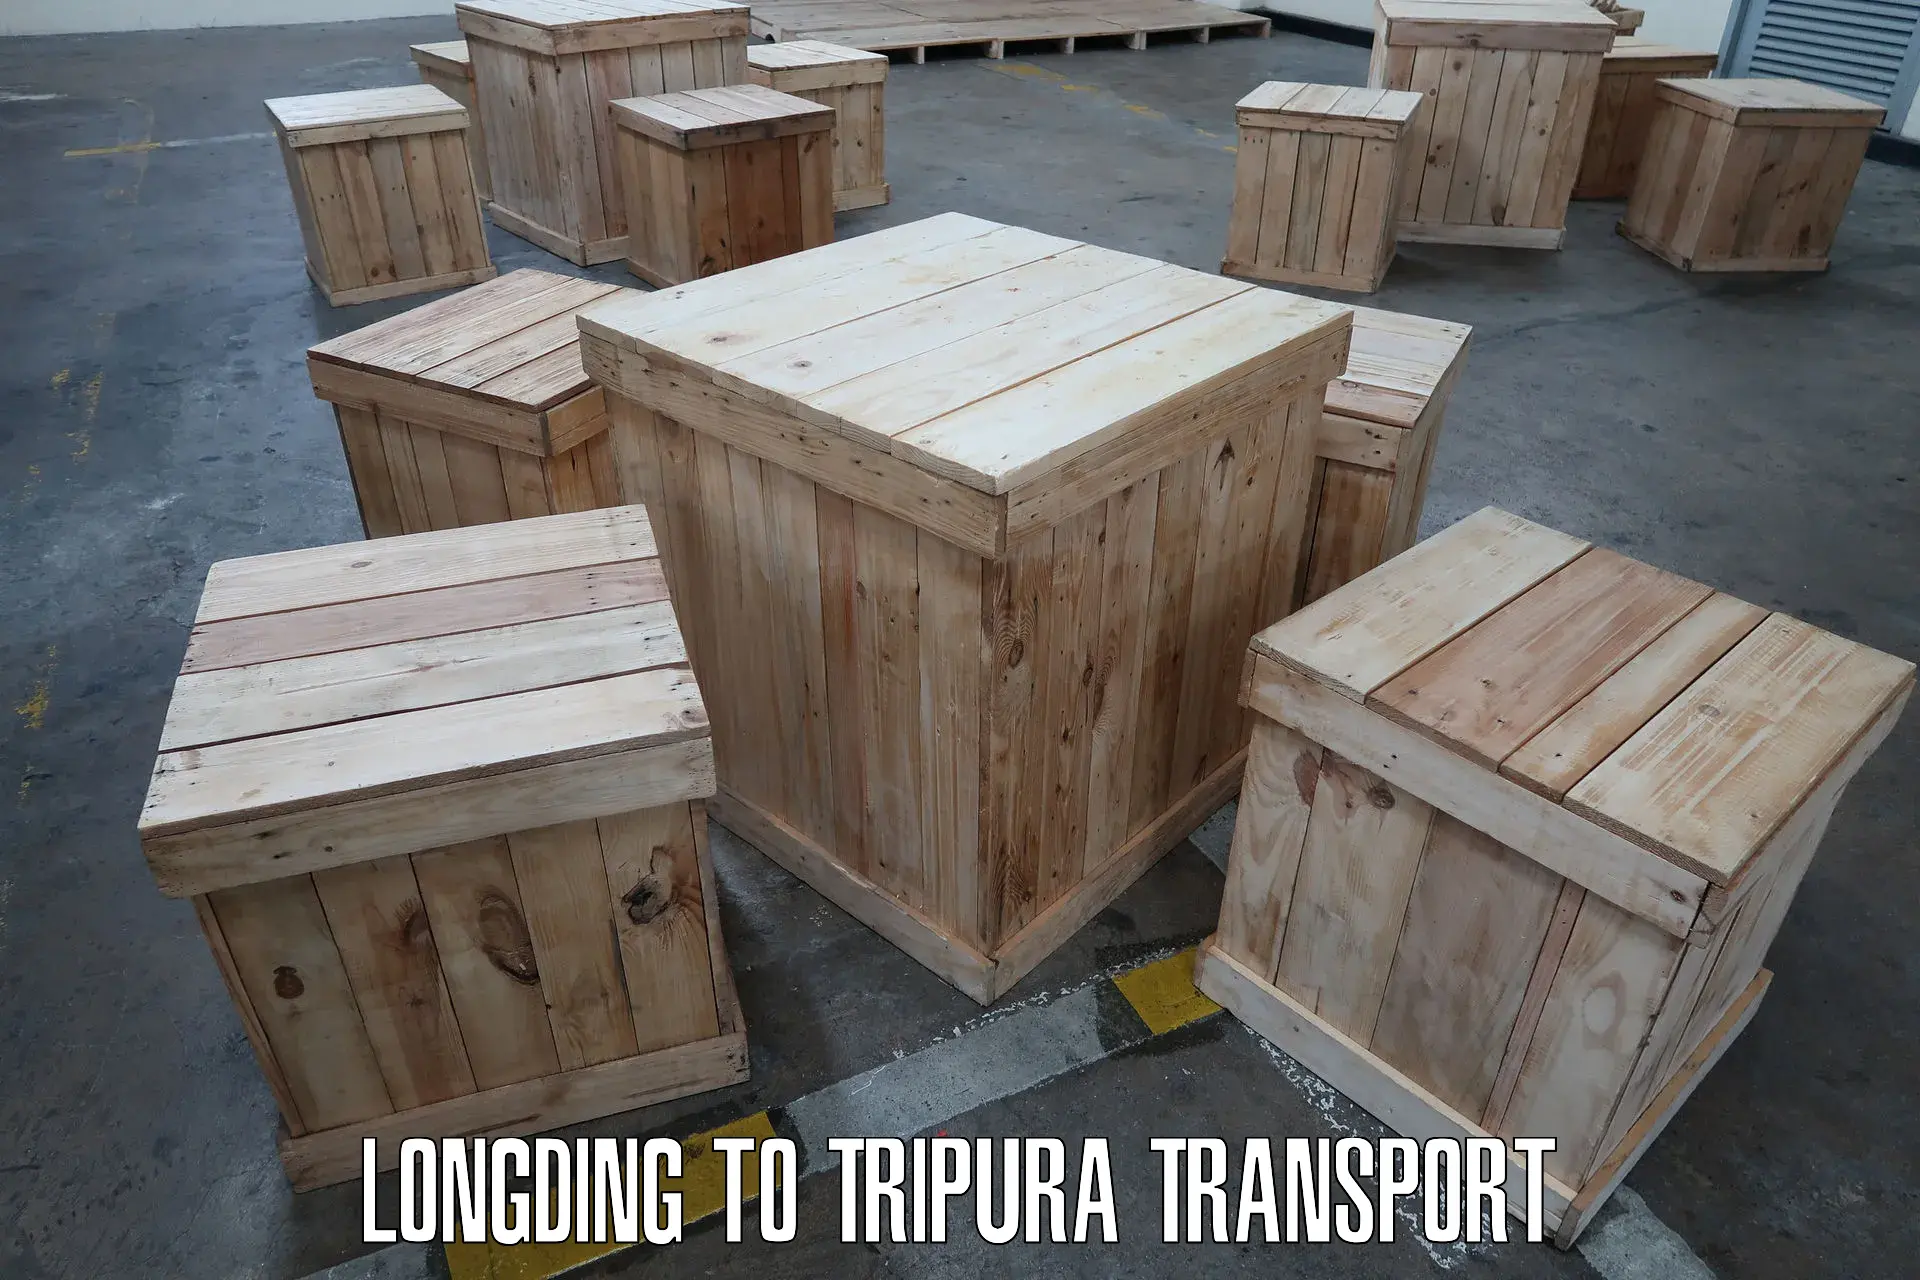 Part load transport service in India Longding to Tripura